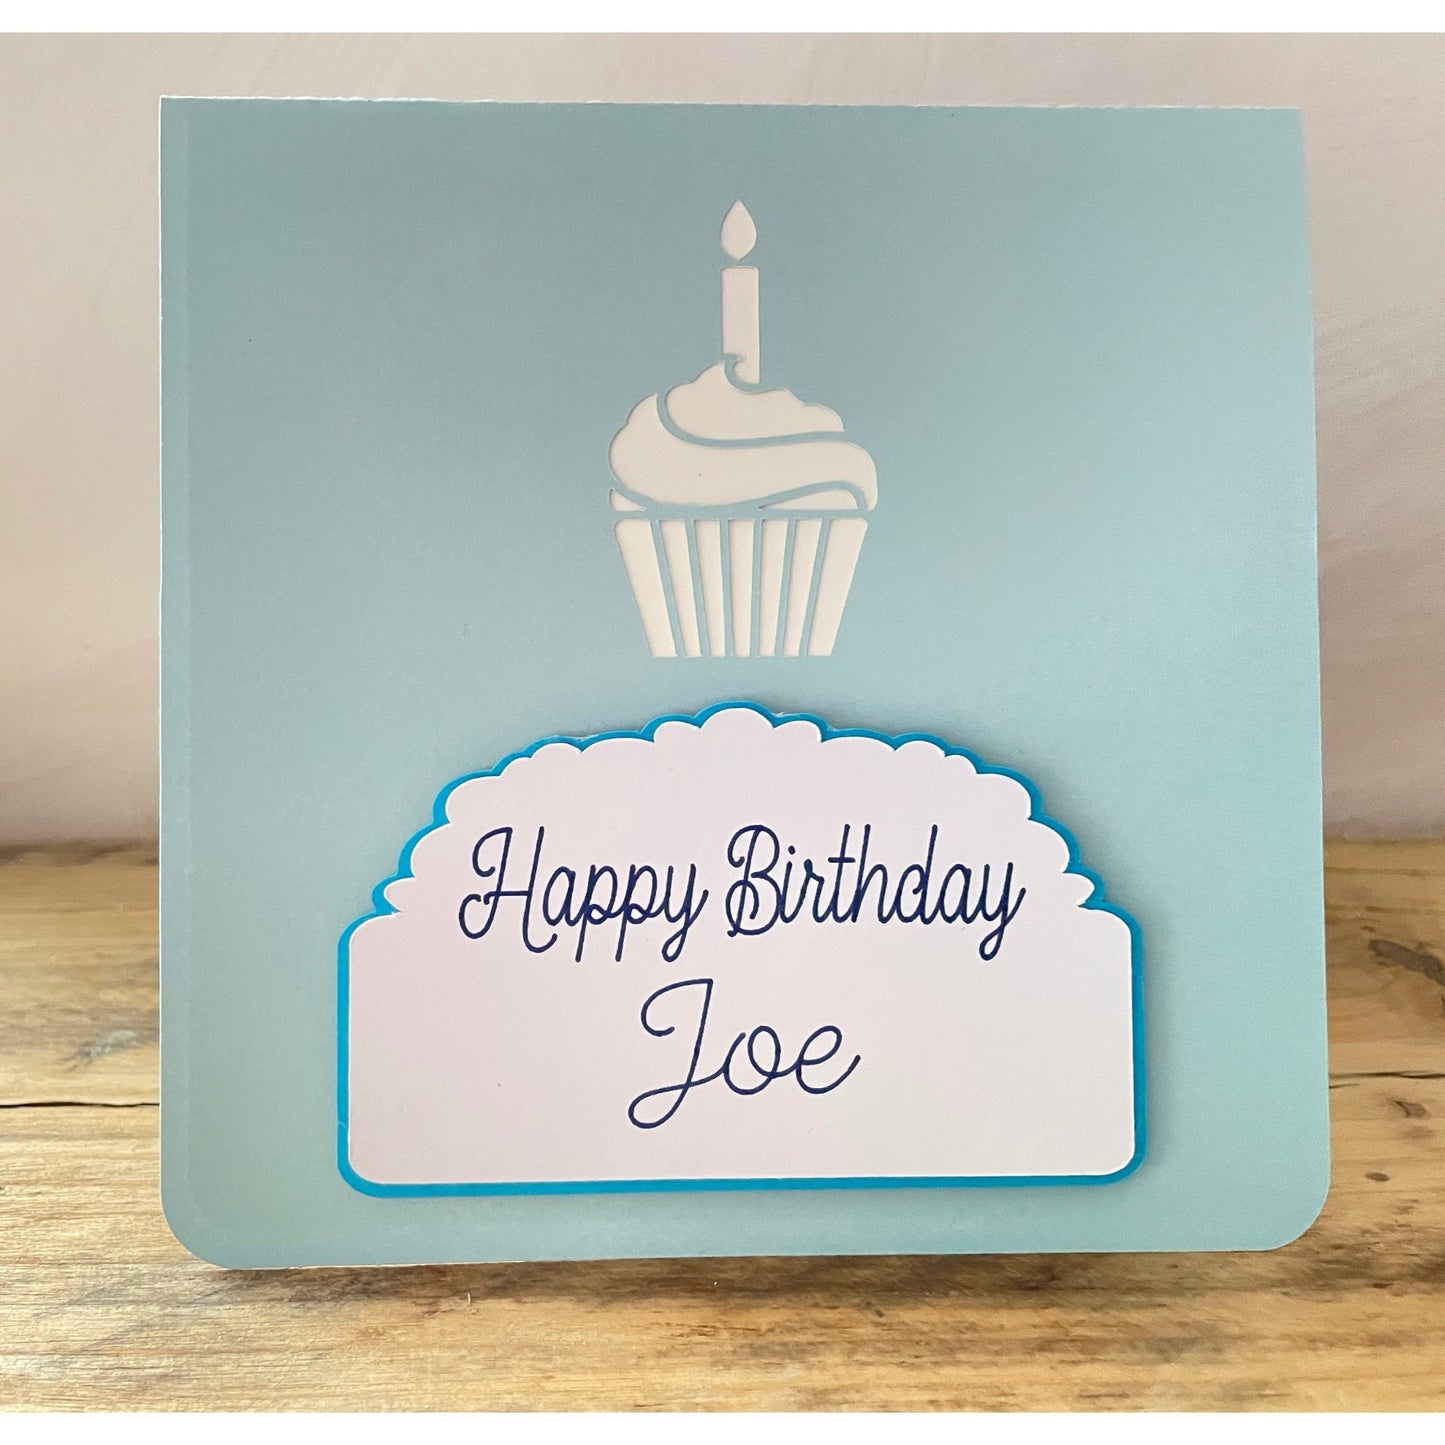 Personalised Pop-Up Cupcake Birthday Card, 3D Plaque Birthday Greetings Card with Name and Candle, Blank Card with Handmade Envelope